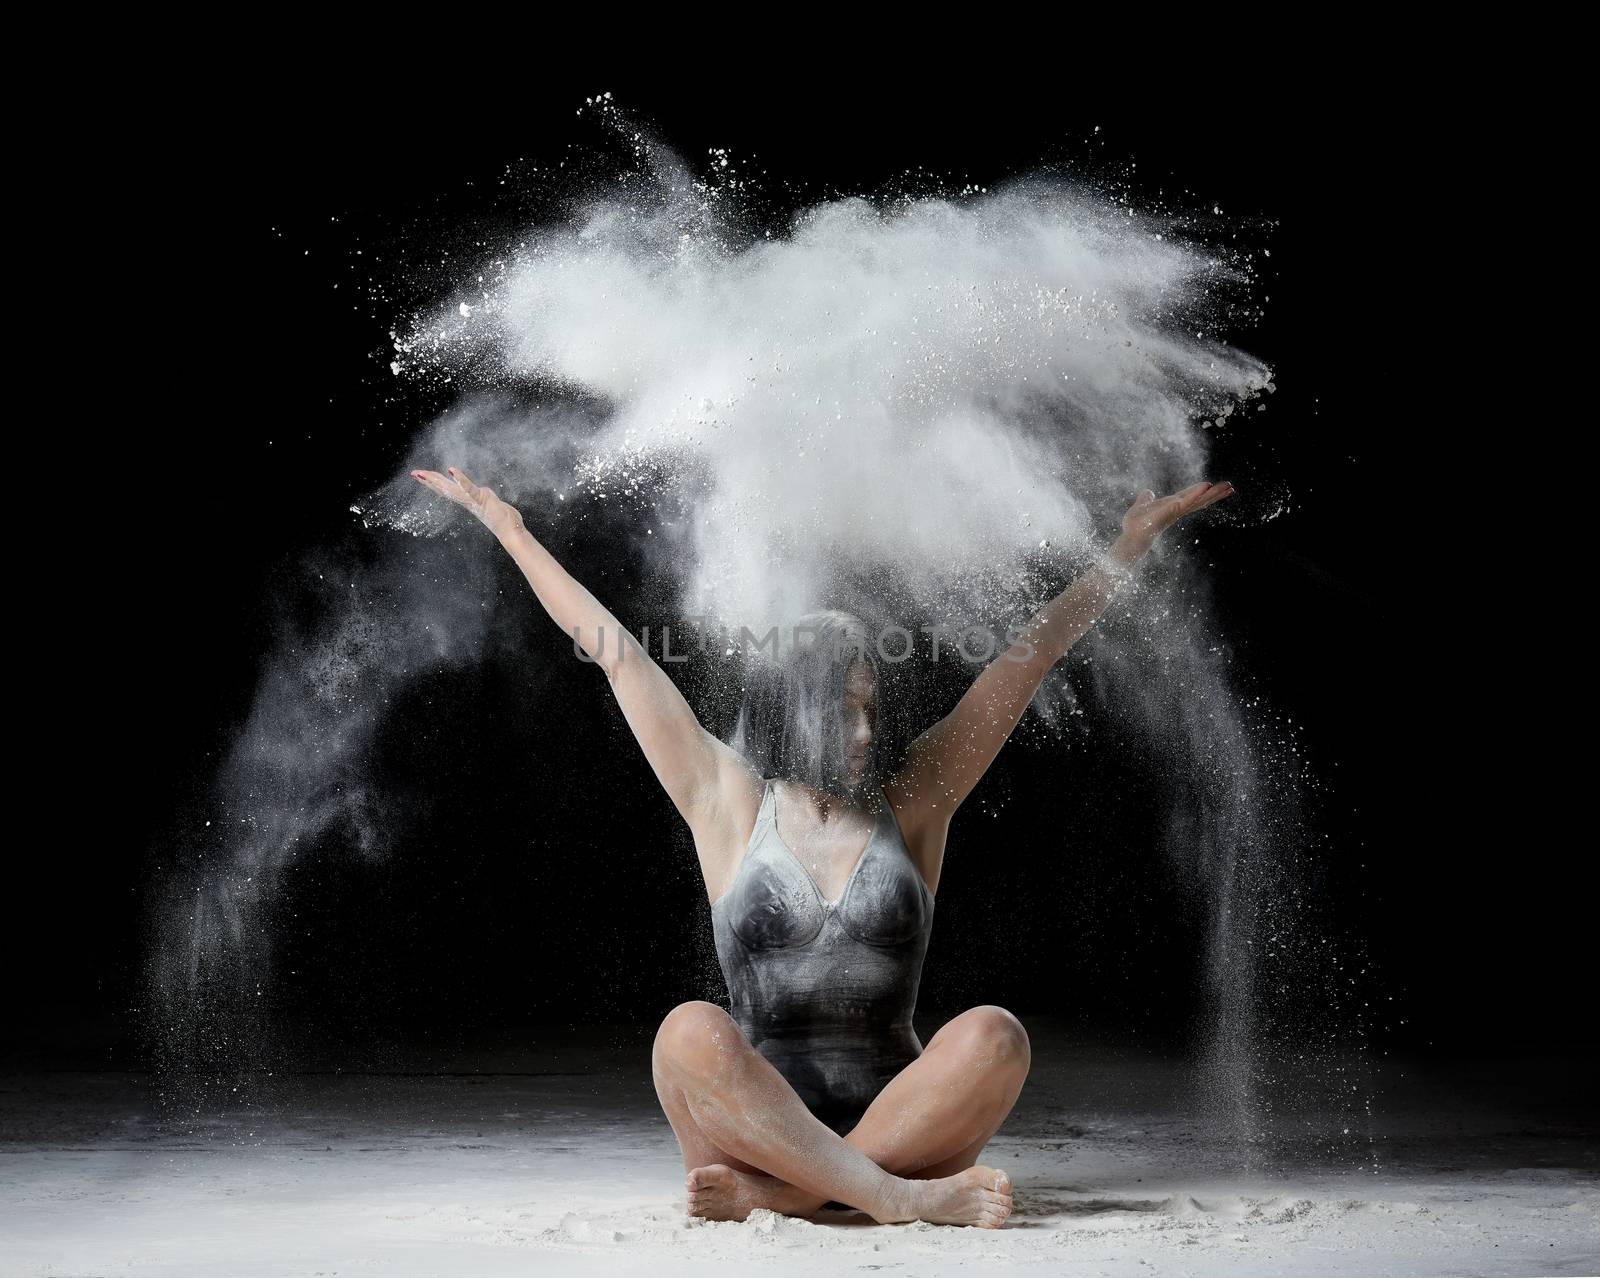 young woman with an athletic body sits on the floor and throws white flour up, dust flies in different directions, athlete is dressed in a black bodysuit